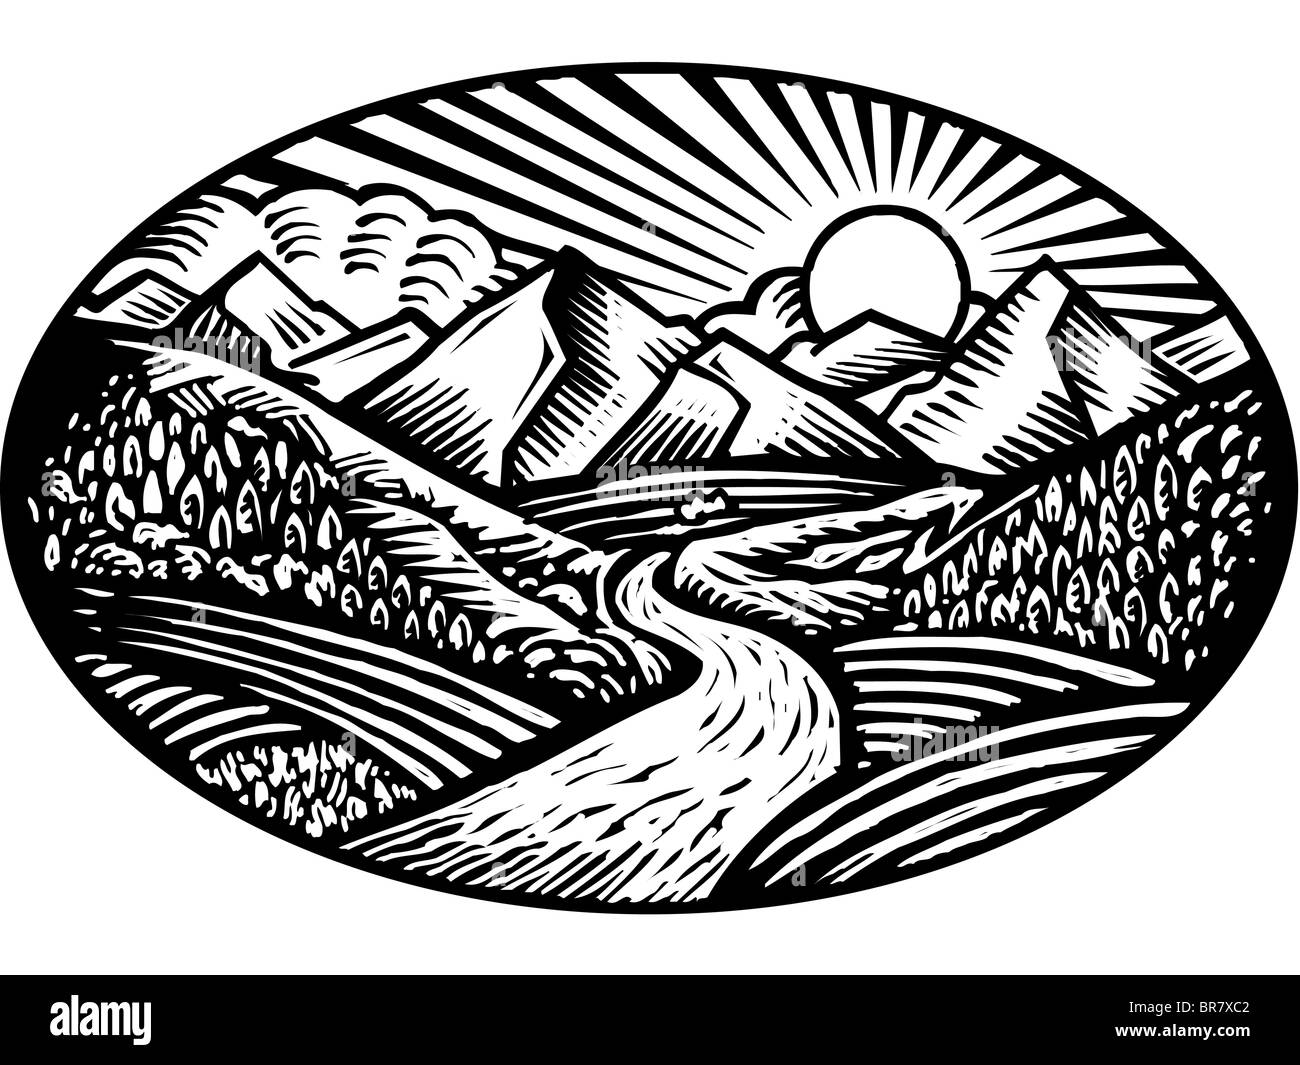 Oval shaped nature scene of mountains, hills and stream, black and white Stock Photo